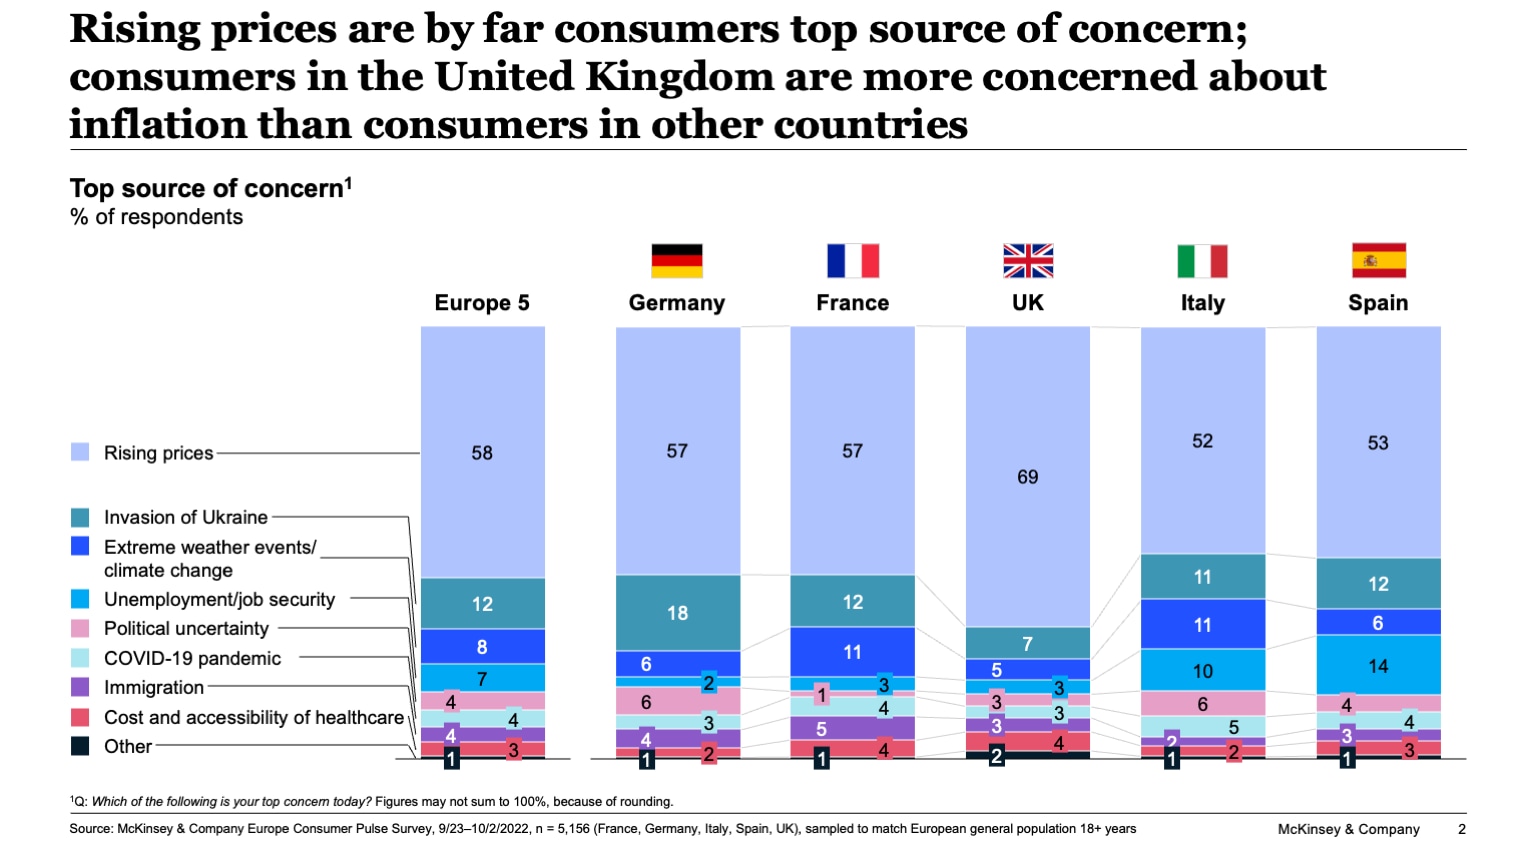 Rising prices are by far consumers top source of concern; consumers in the United Kingdom are more concerned about inflation than consumers in other countries